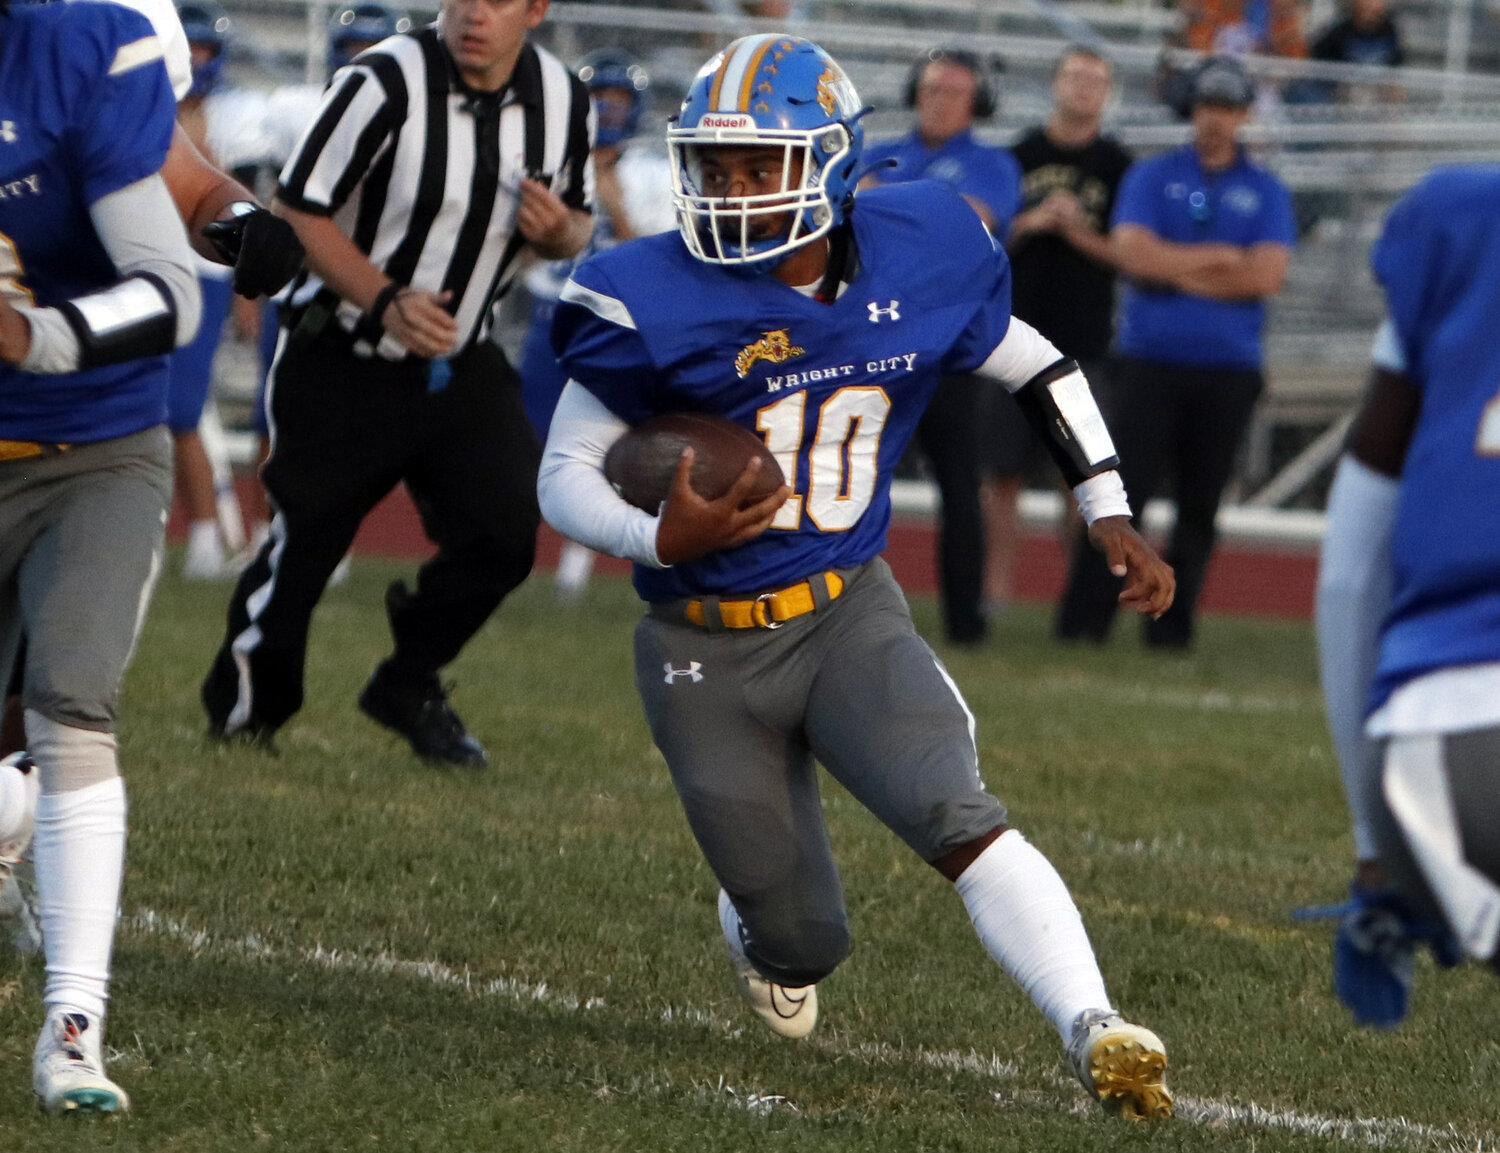 Duan McRoberts carries the ball against South Callaway this past season. McRoberts was named to the EMO first team at running back and as a returner.